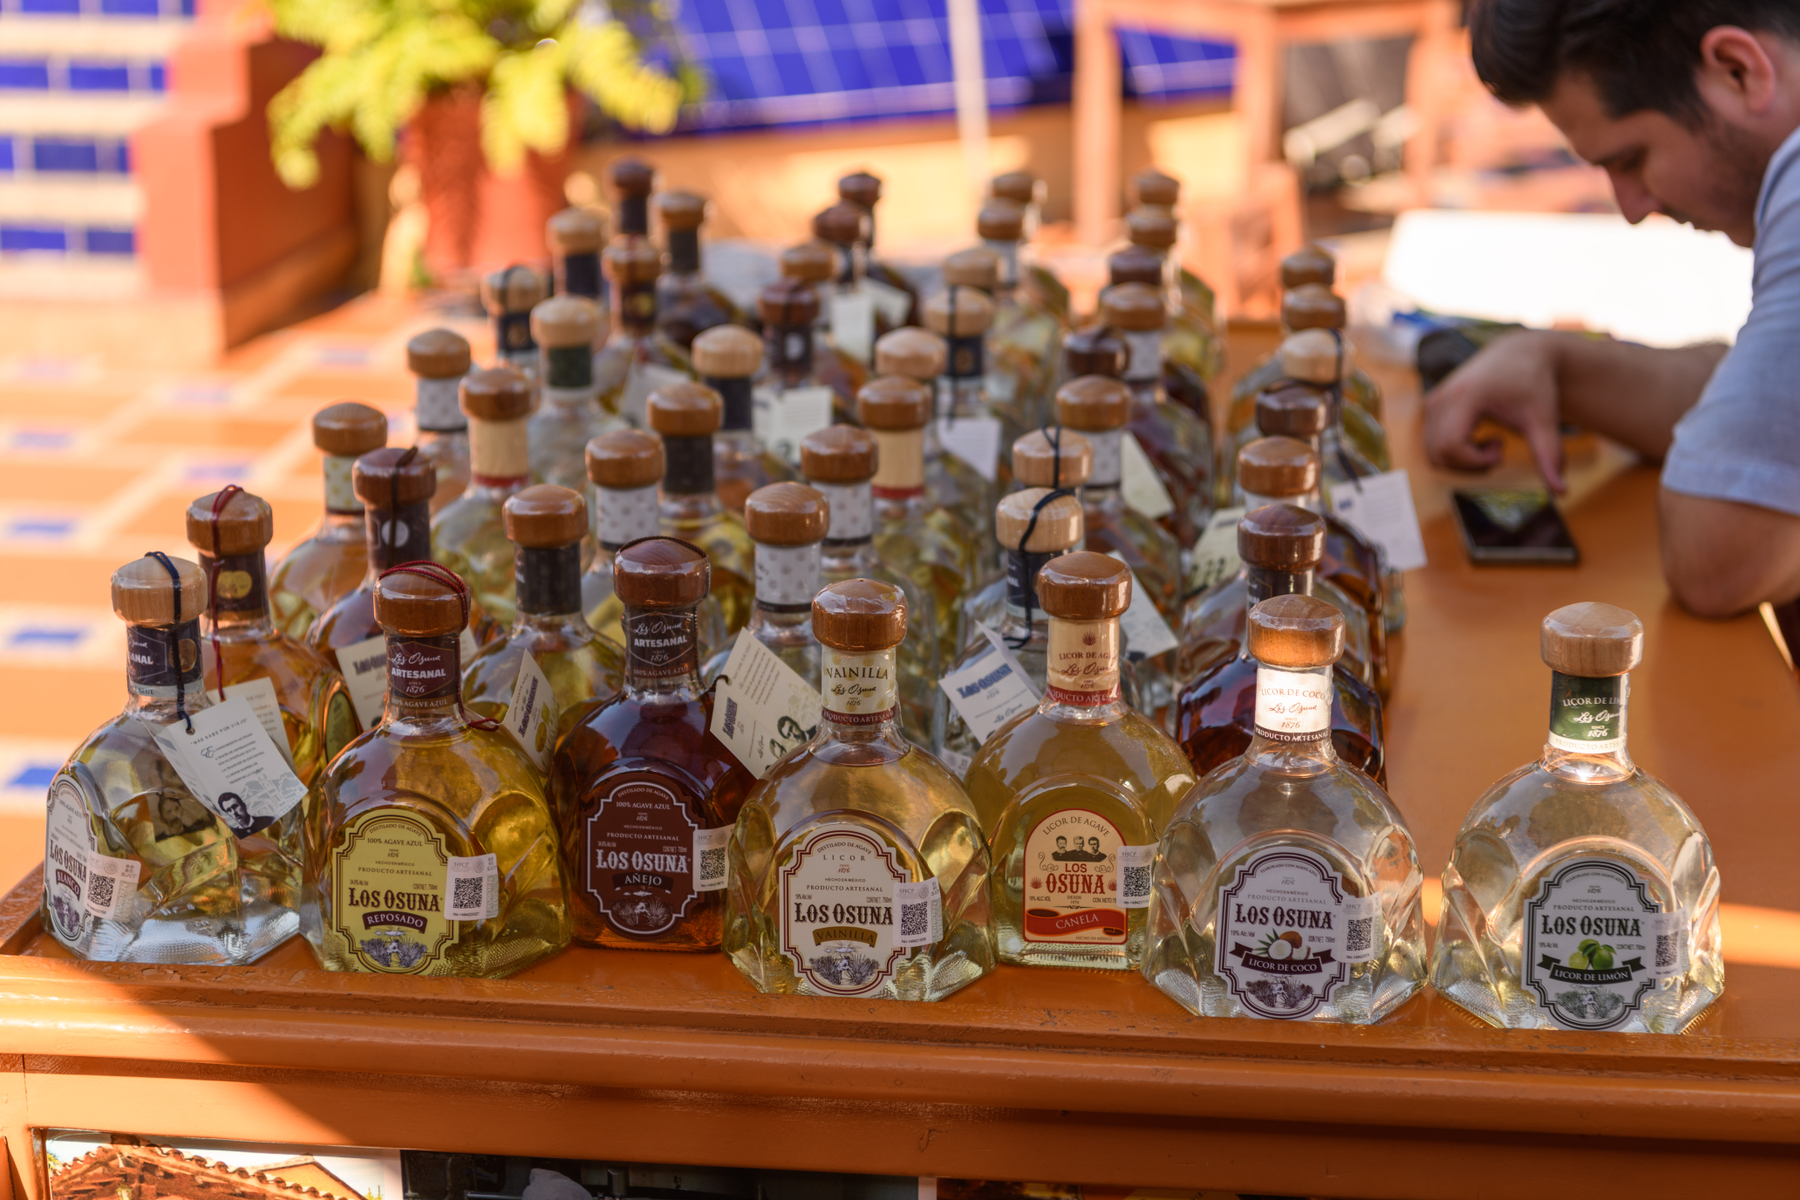 March 11, 2020Mazatlan is known for making tequila and mezcal.